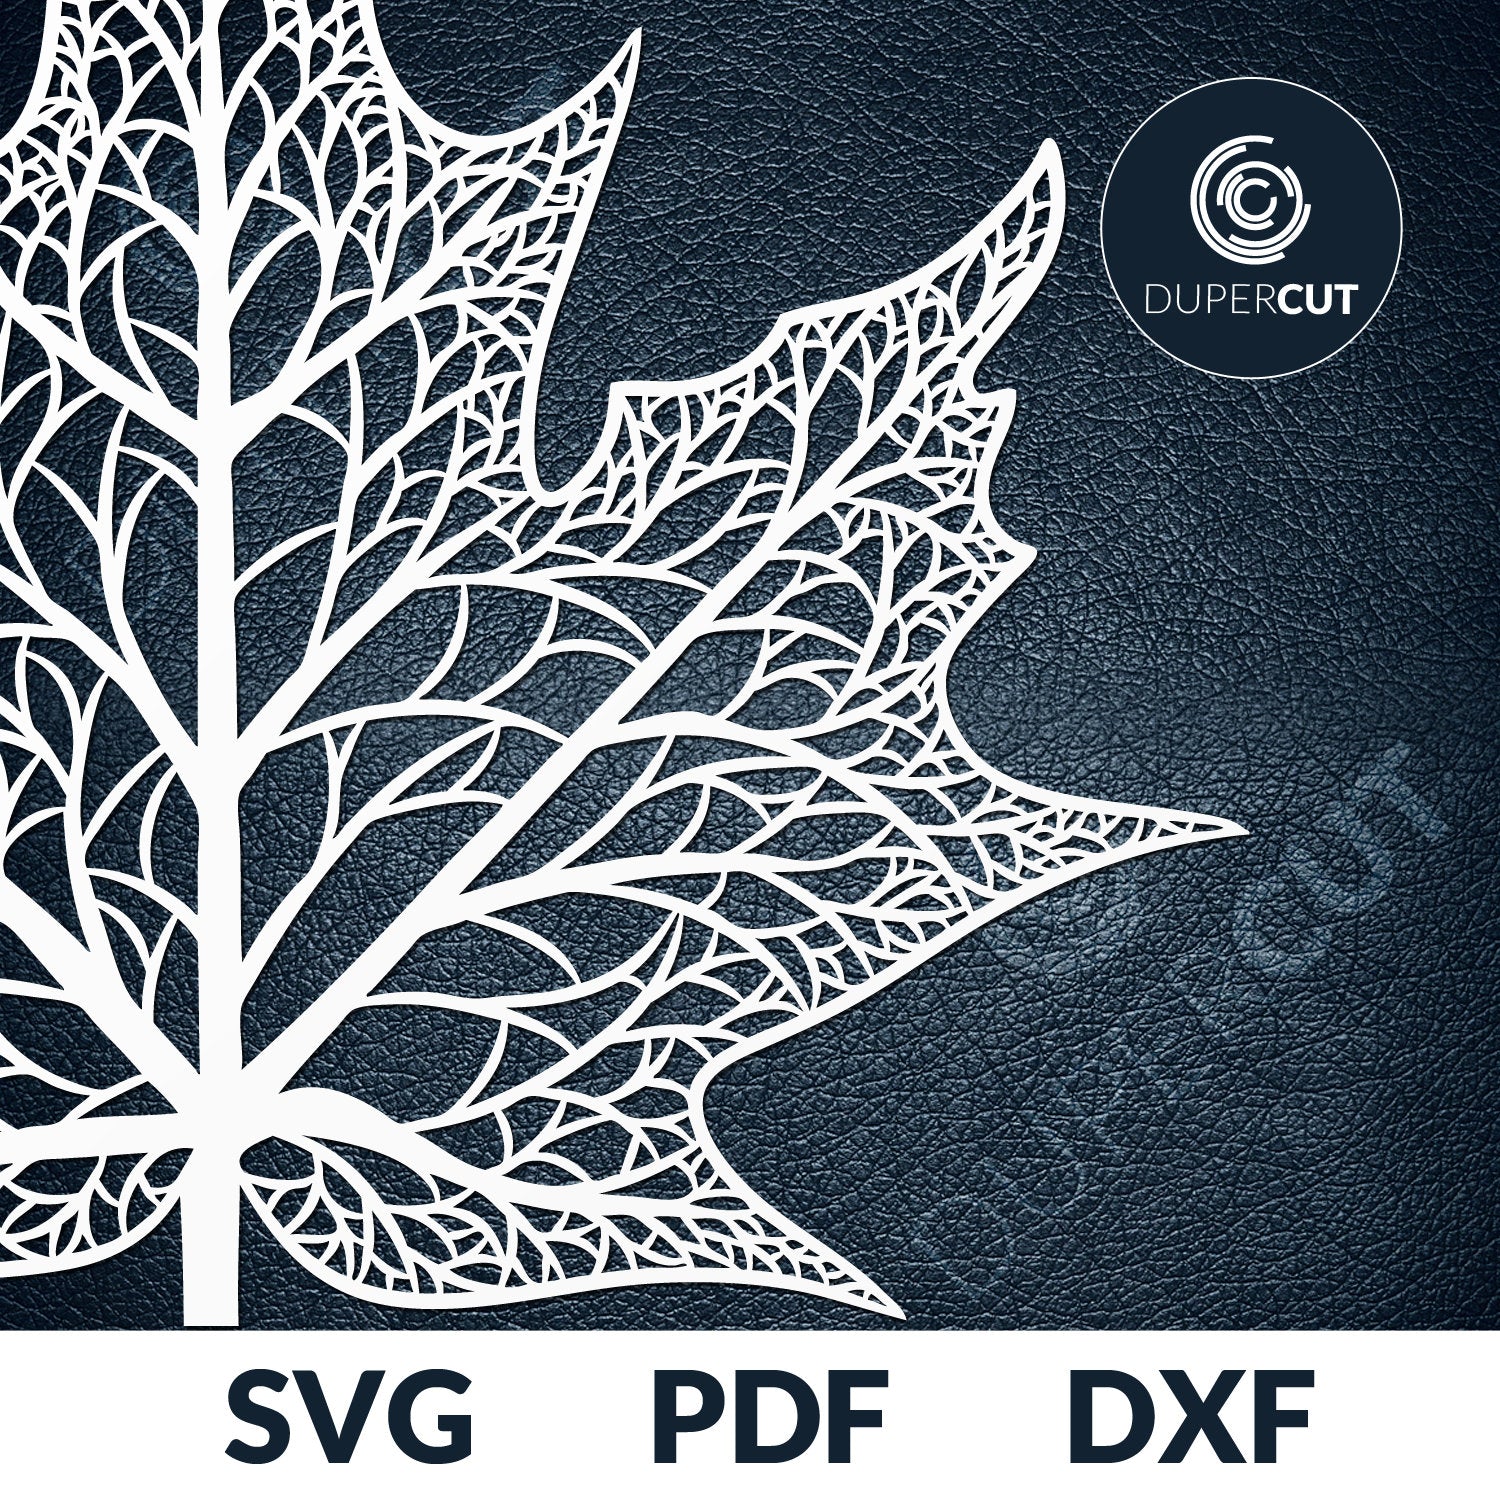 Maple leaf art design. SVG PNG DXF files Paper cutting template for personal or commercial use. Vinyl template cutting files for Cricut, Glowforge, Silhouette, CNC